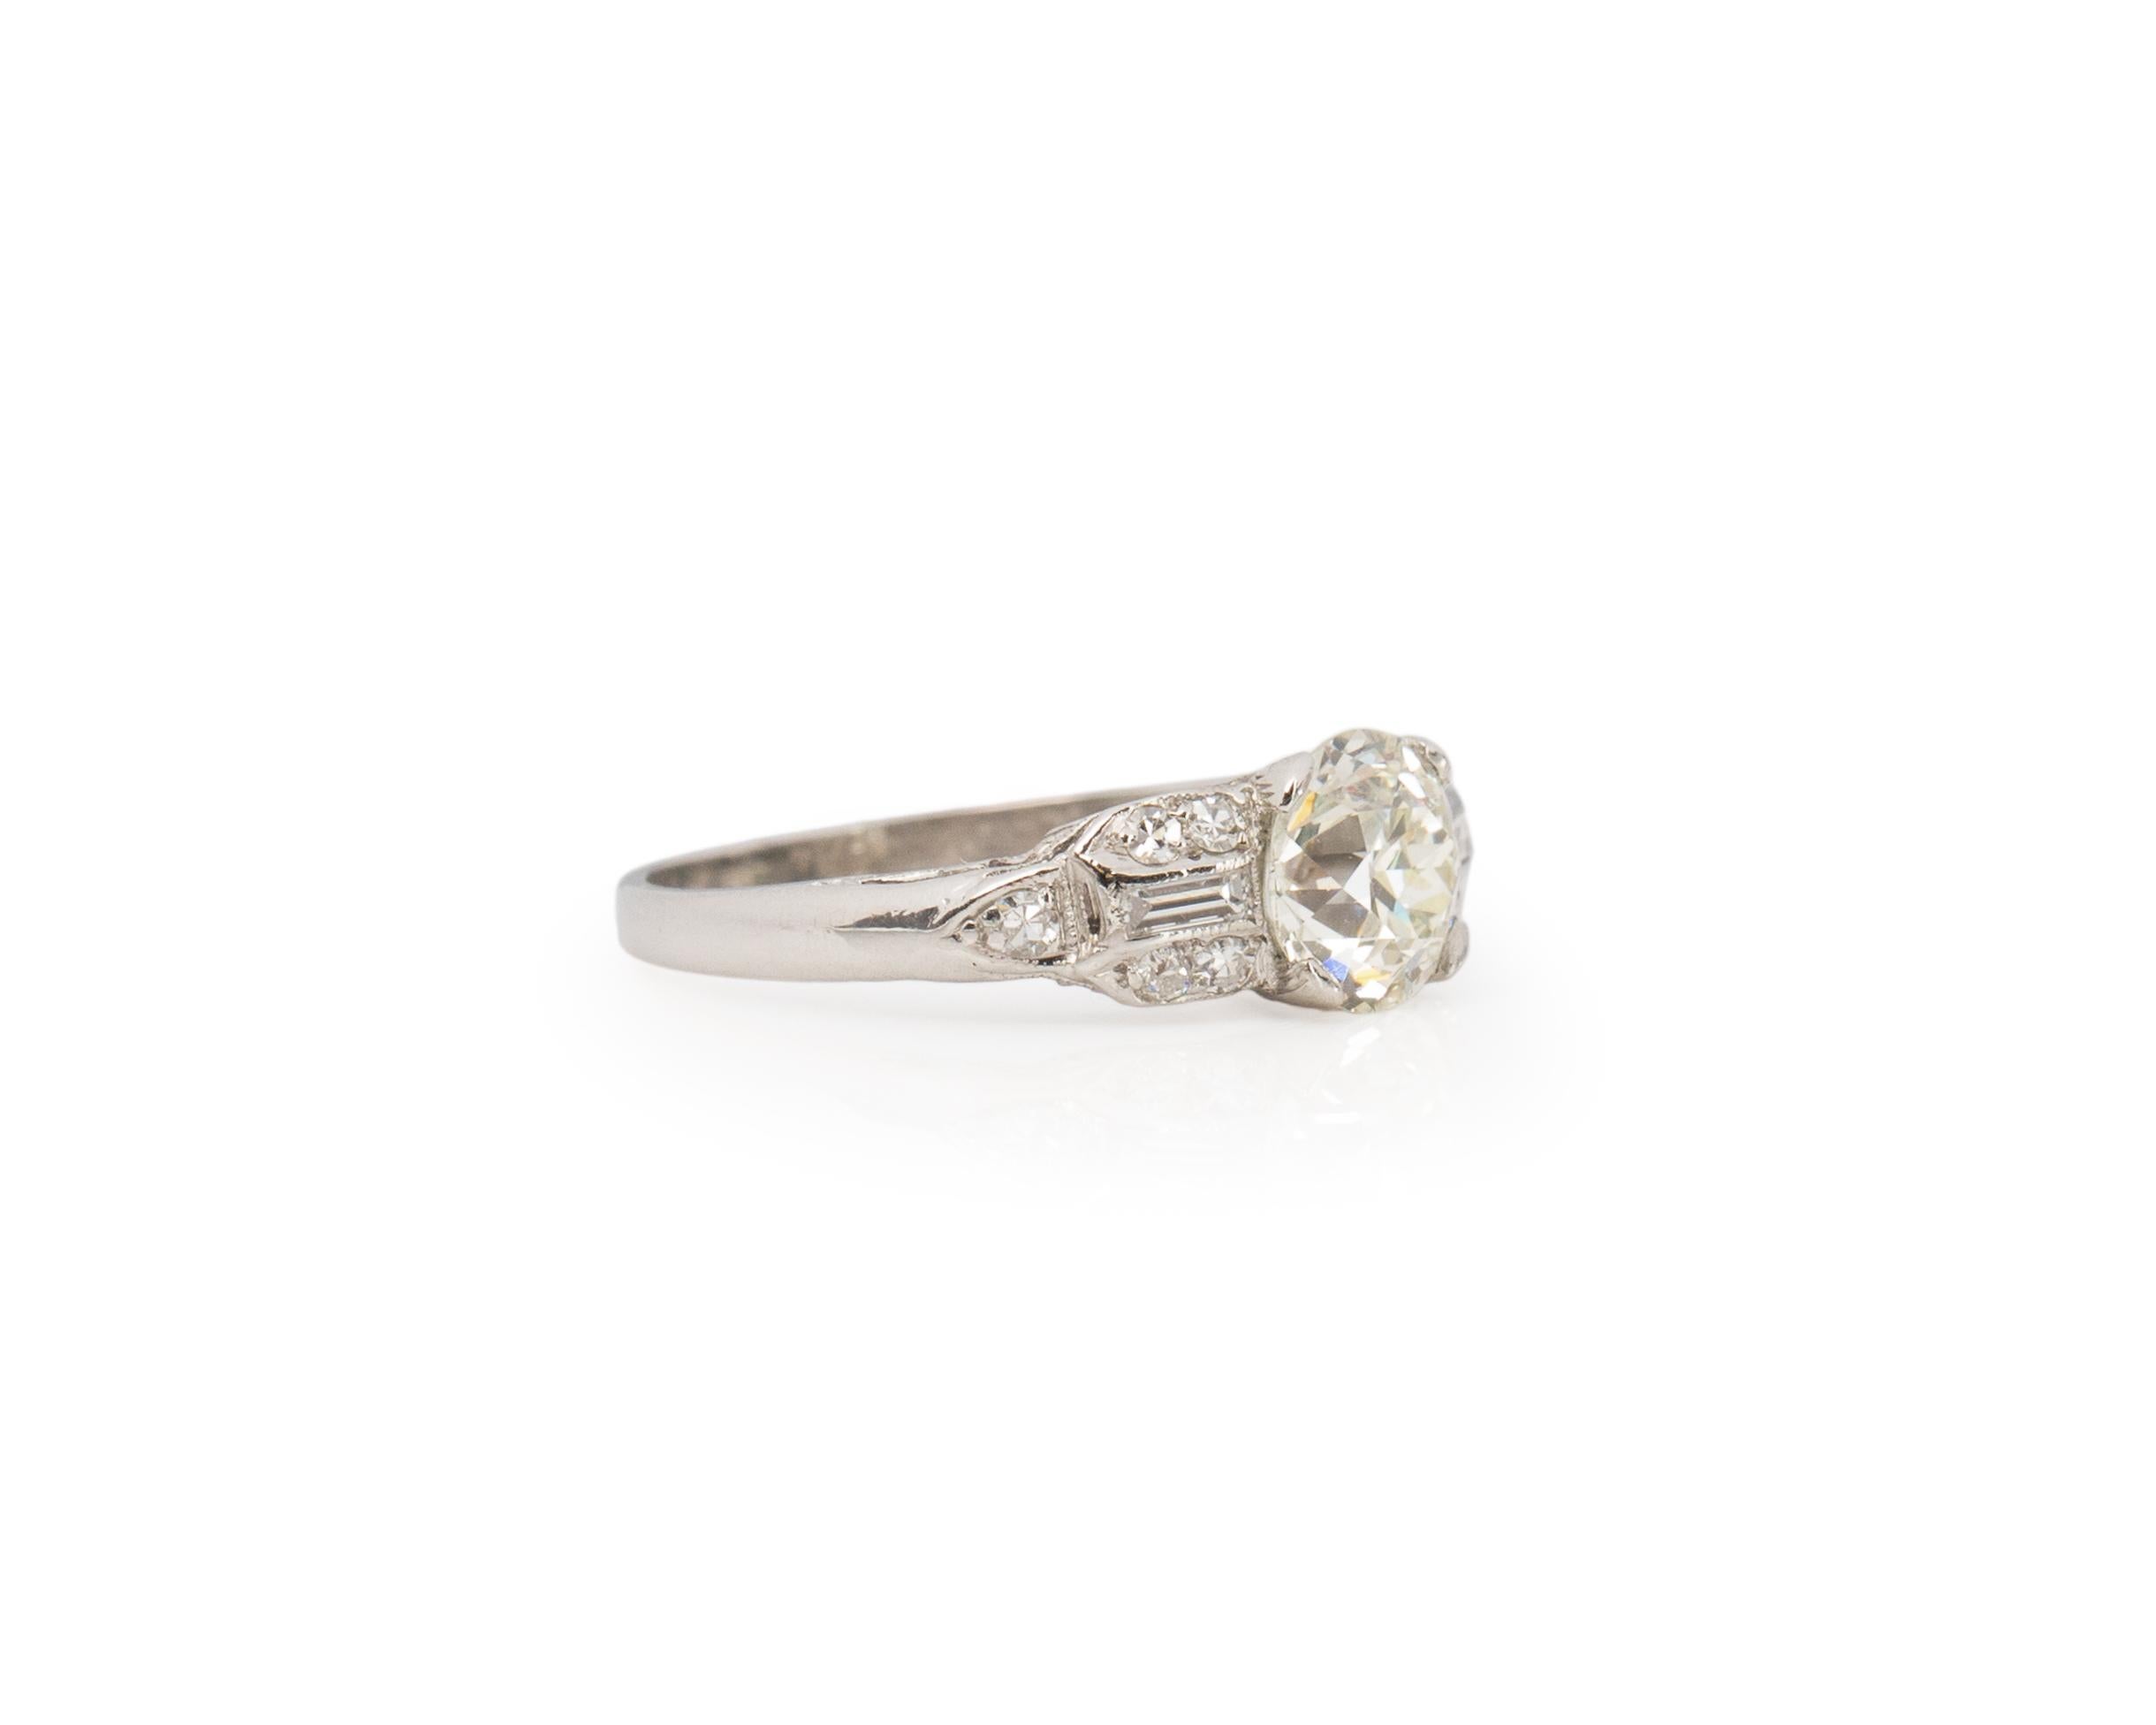 Ring Size: 4.75
Metal Type: Platinum [Hallmarked, and Tested]
Weight: 2.4 grams

Center Diamond Details:
GIA LAB REPORT #: 6455888095
Weight: 1.02ct
Cut: Old European brilliant
Color: K
Clarity: SI1
Measurements: 6.43mm x 6.22mm x 4.11mm

Side